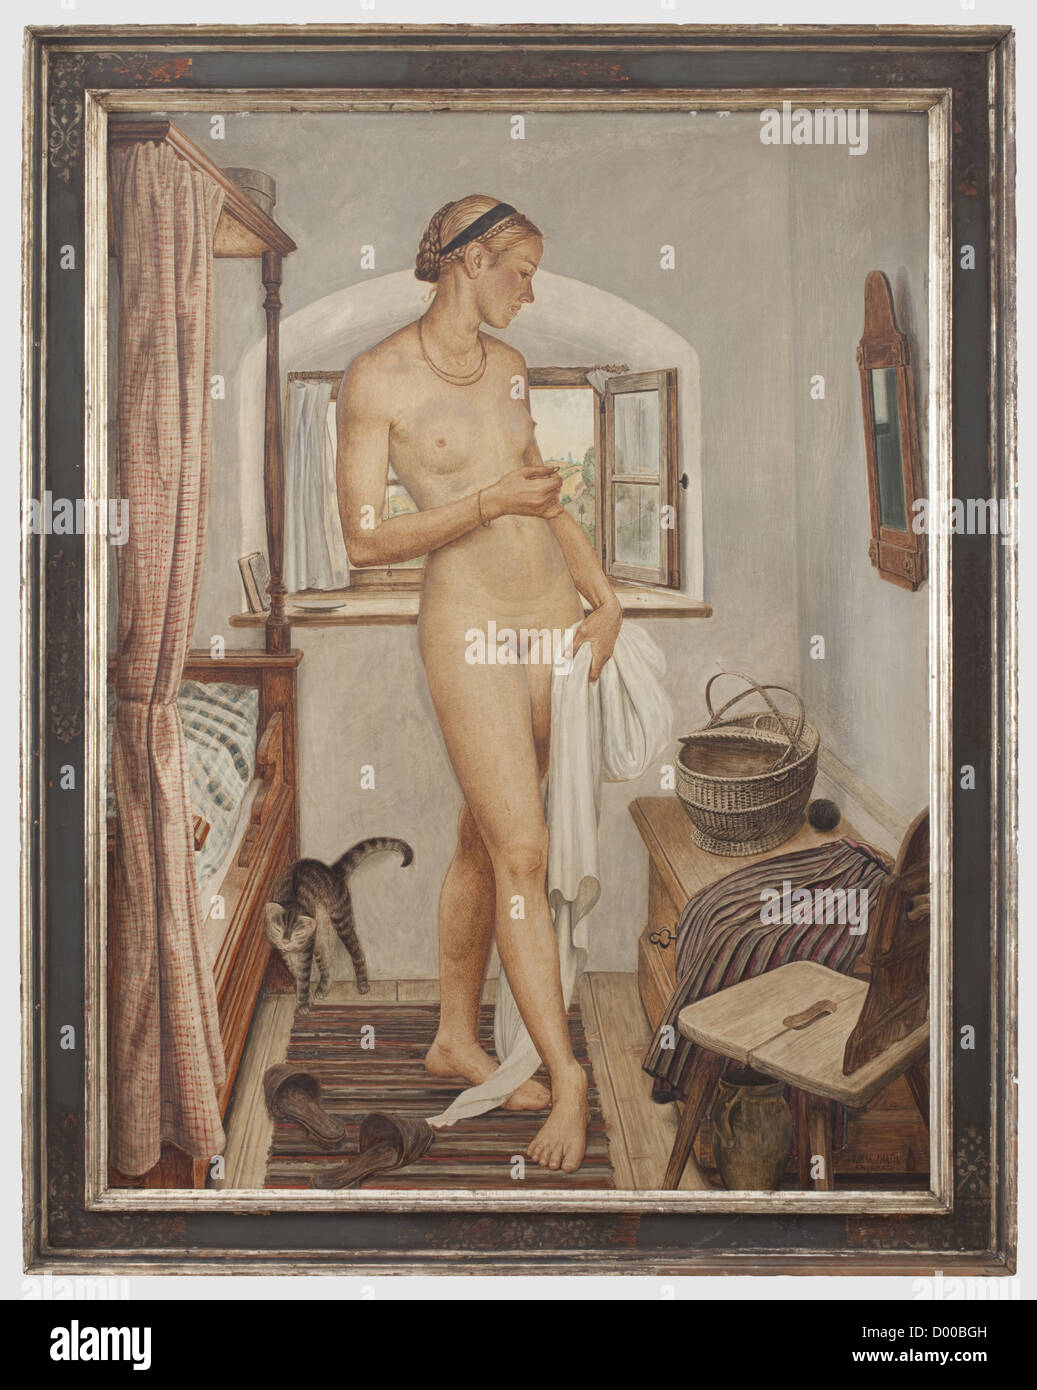 Oskar Martin-Amorbach(1897 - 1987)- 'Bauerngrazie'(Peasant Beauty),Tempera on wood,signed on the lower right 'Oskar Martin-Amorbach'. In original,partially silvered wood frame(slightly chipped),the back with the exhibition label 'Große Deutsche Kunstausstellung 1940 im Haus der Deutschen Kunst zu München'. Picture dimensions 155 x 118 cm,framed dimensions 177.5 x 140 cm. Oskar Martin-Amorbach,noted German painter. Studied at the Royal School of Arts and Crafts in Munich. Pupil of Carl Johann Becker-Gundahl and Franz von Stuck. After completing his stu,Additional-Rights-Clearences-Not Available Stock Photo